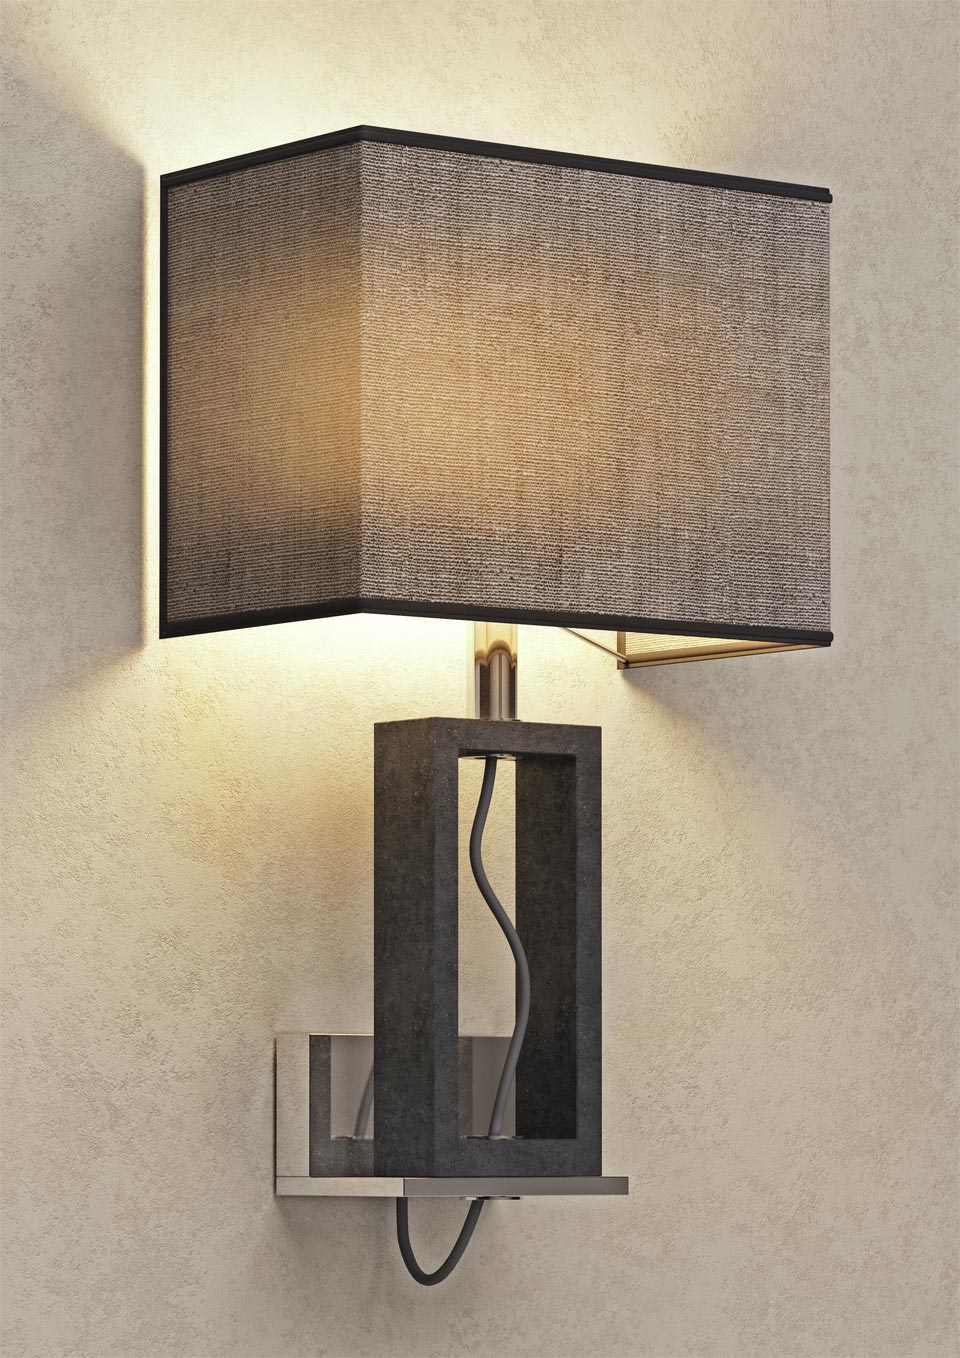 Contemporary marble wall sconce. Matlight. 